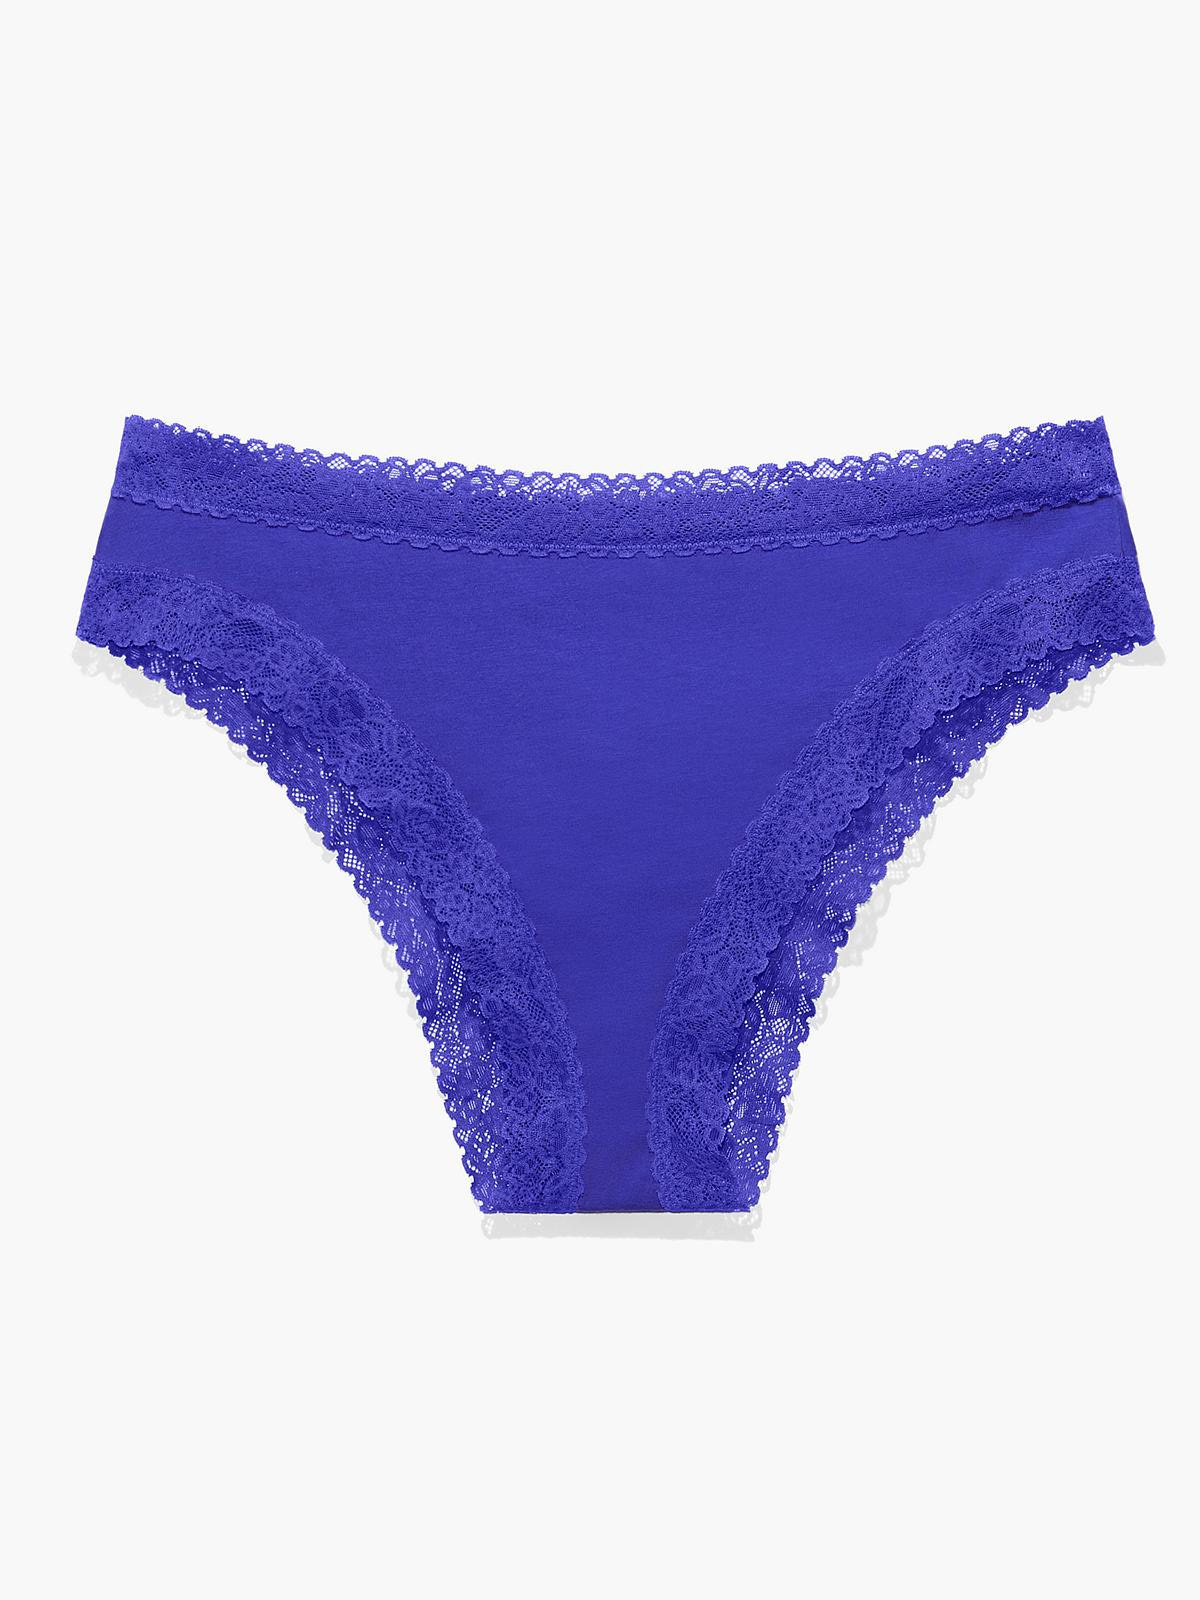 Super Soft Cheeky Panty with Delicate Lace Trim